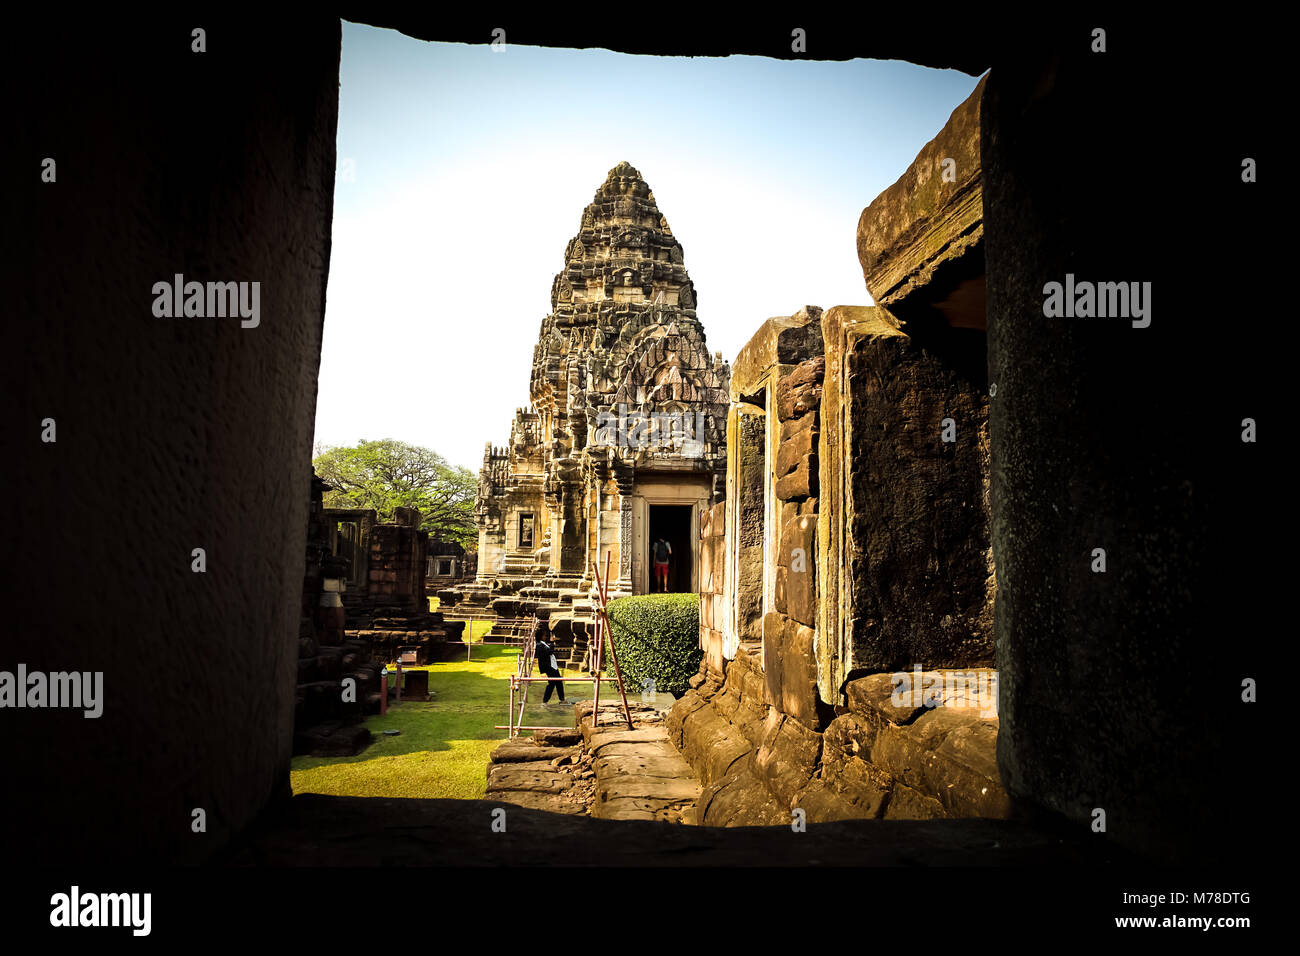 NAKHON RATCHASIMA, THAILAND - February 15, 2018: The world heritage Prasat Hin Phimai in Nakhon Ratchasima province, Thailand. The old temple of the A Stock Photo